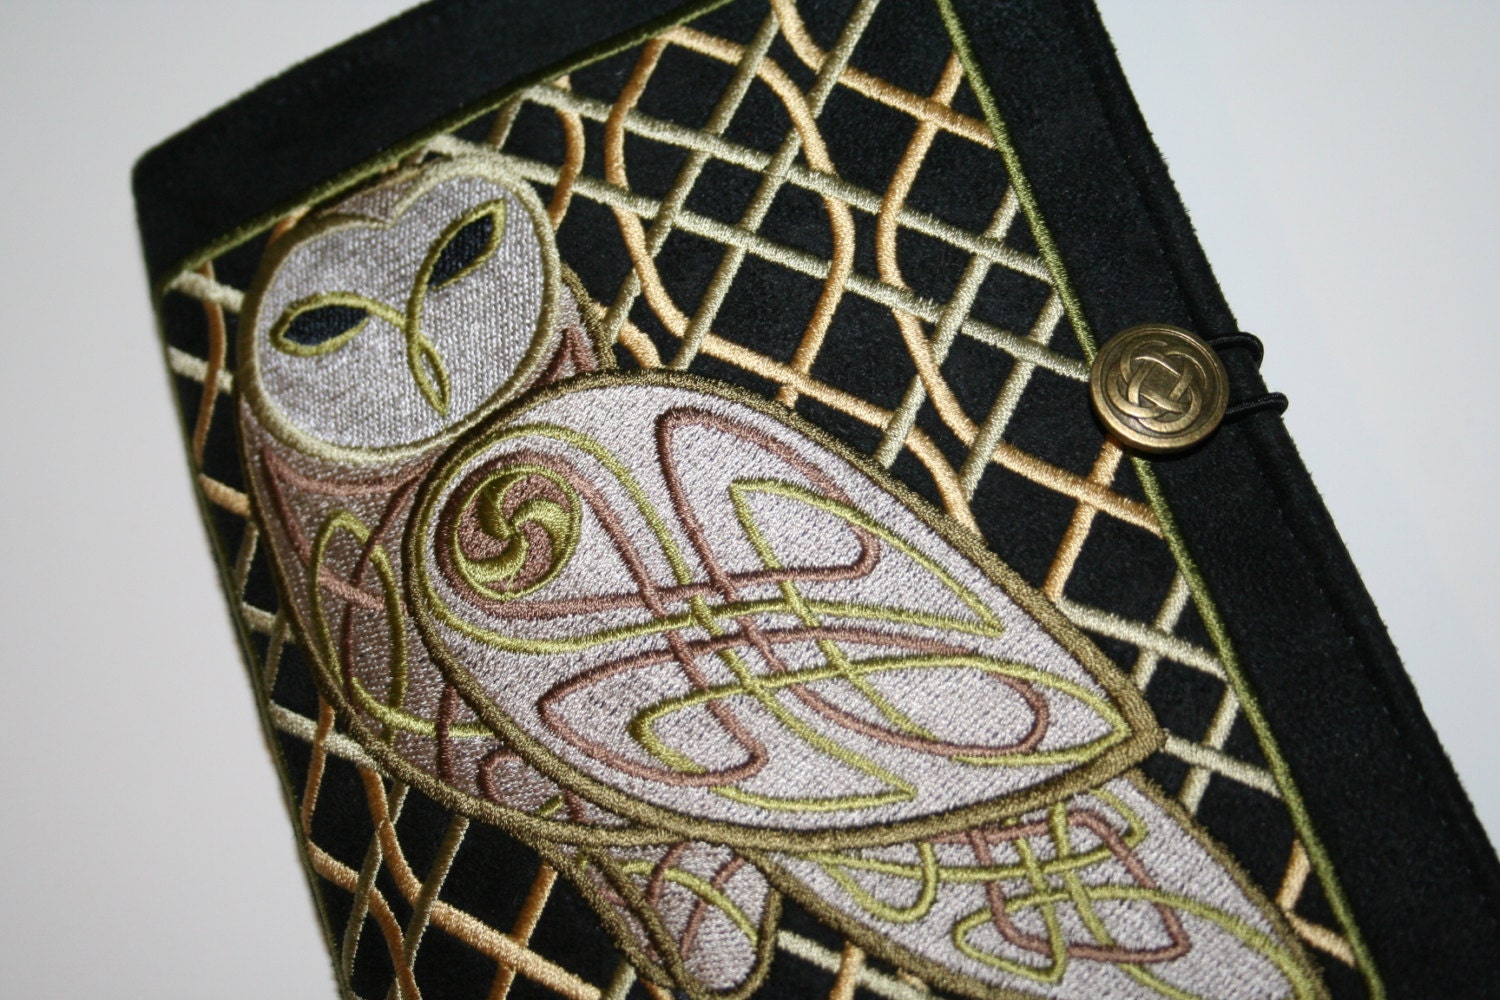 celtic owl embroidery patterns free